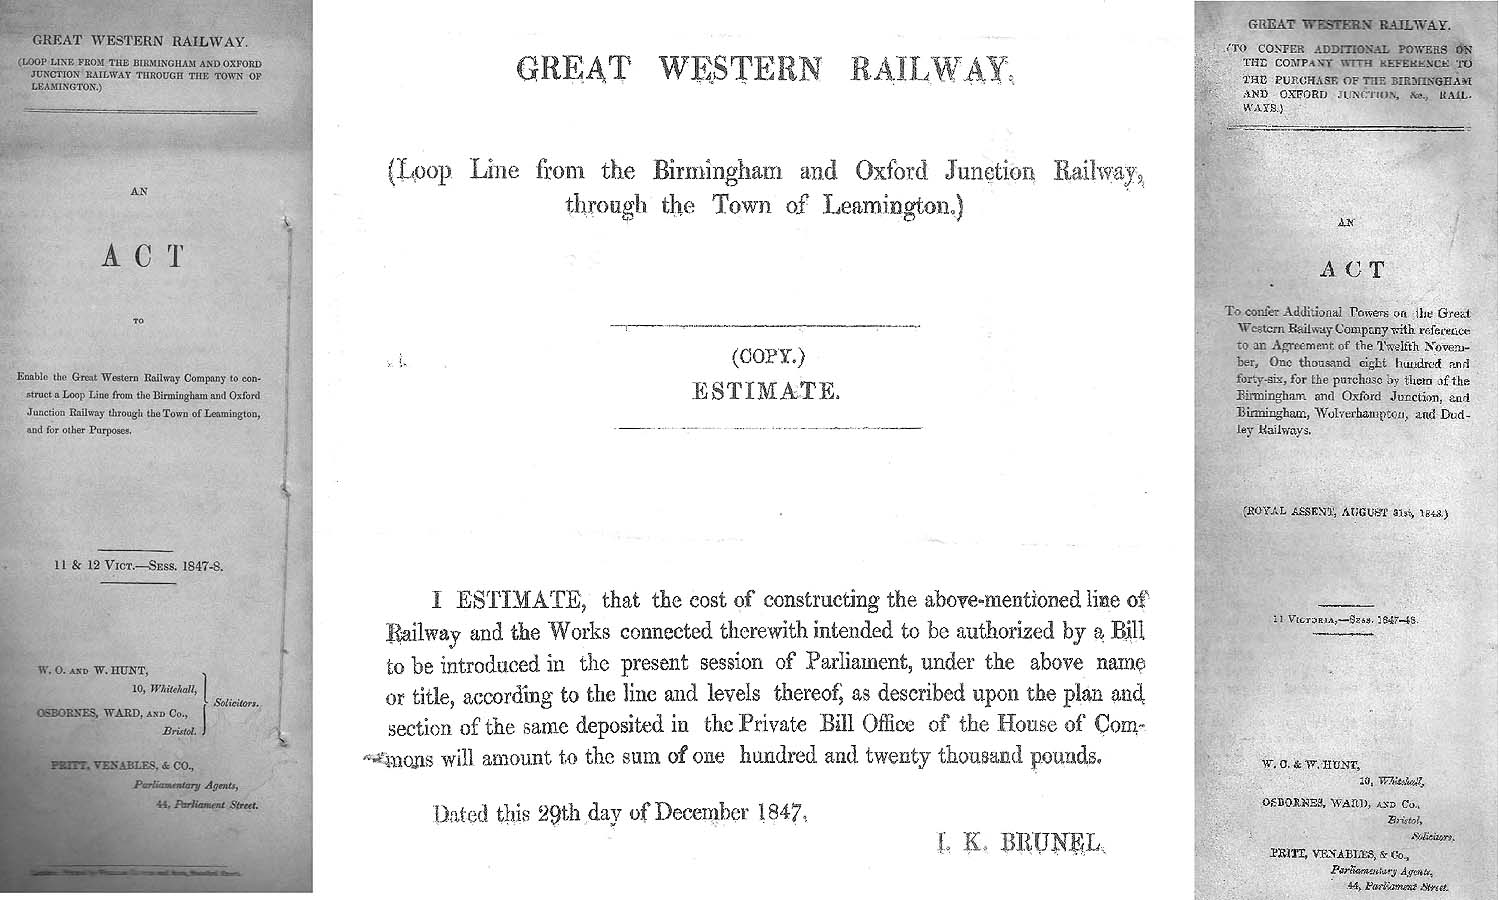 Copy of the Parliamentary Act authorising the GWR Loop Line through the Town of Leamington